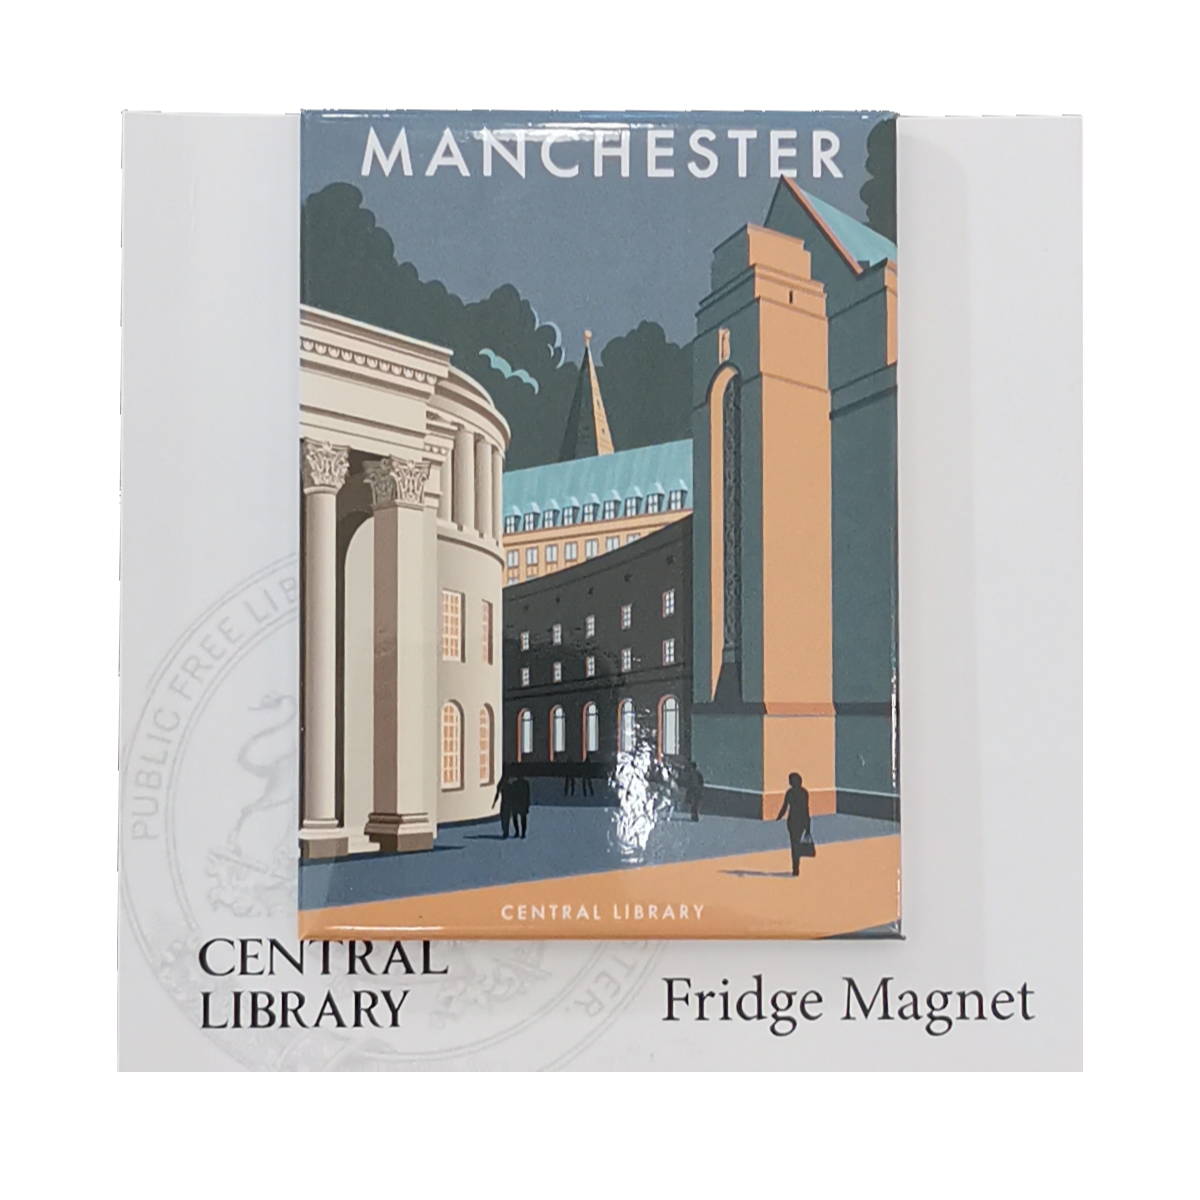 Fridge magnet showing and art deco style image of Manchester Central Library and town hall extension.